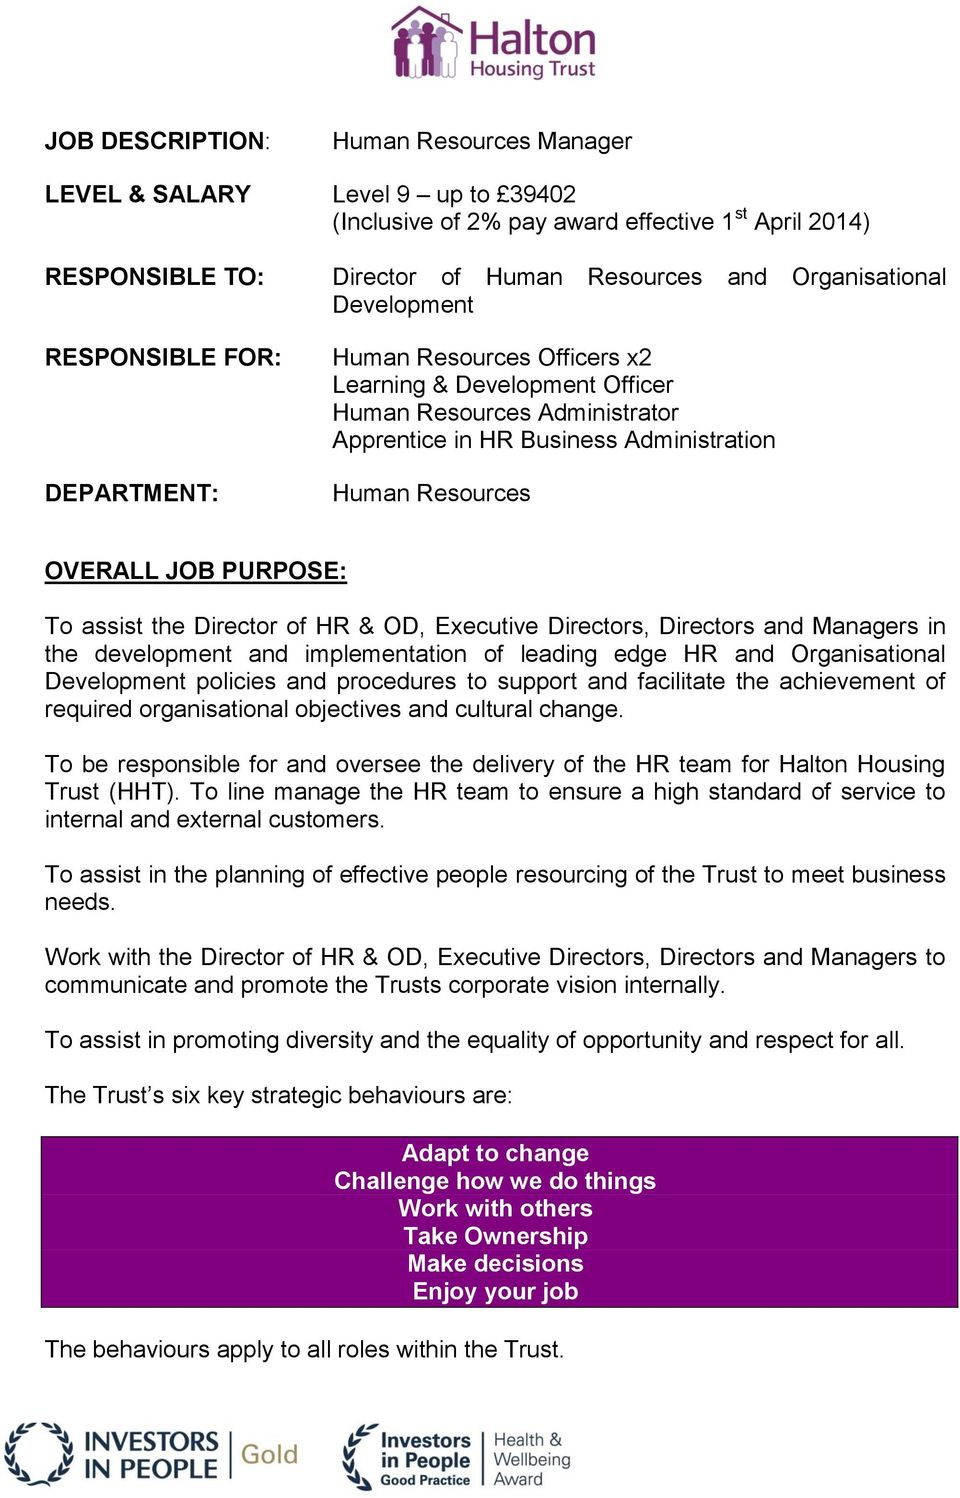 PURPOSE: To assist the Director of HR & OD, Executive Directors, Directors and Managers in the development and implementation of leading edge HR and Organisational Development policies and procedures